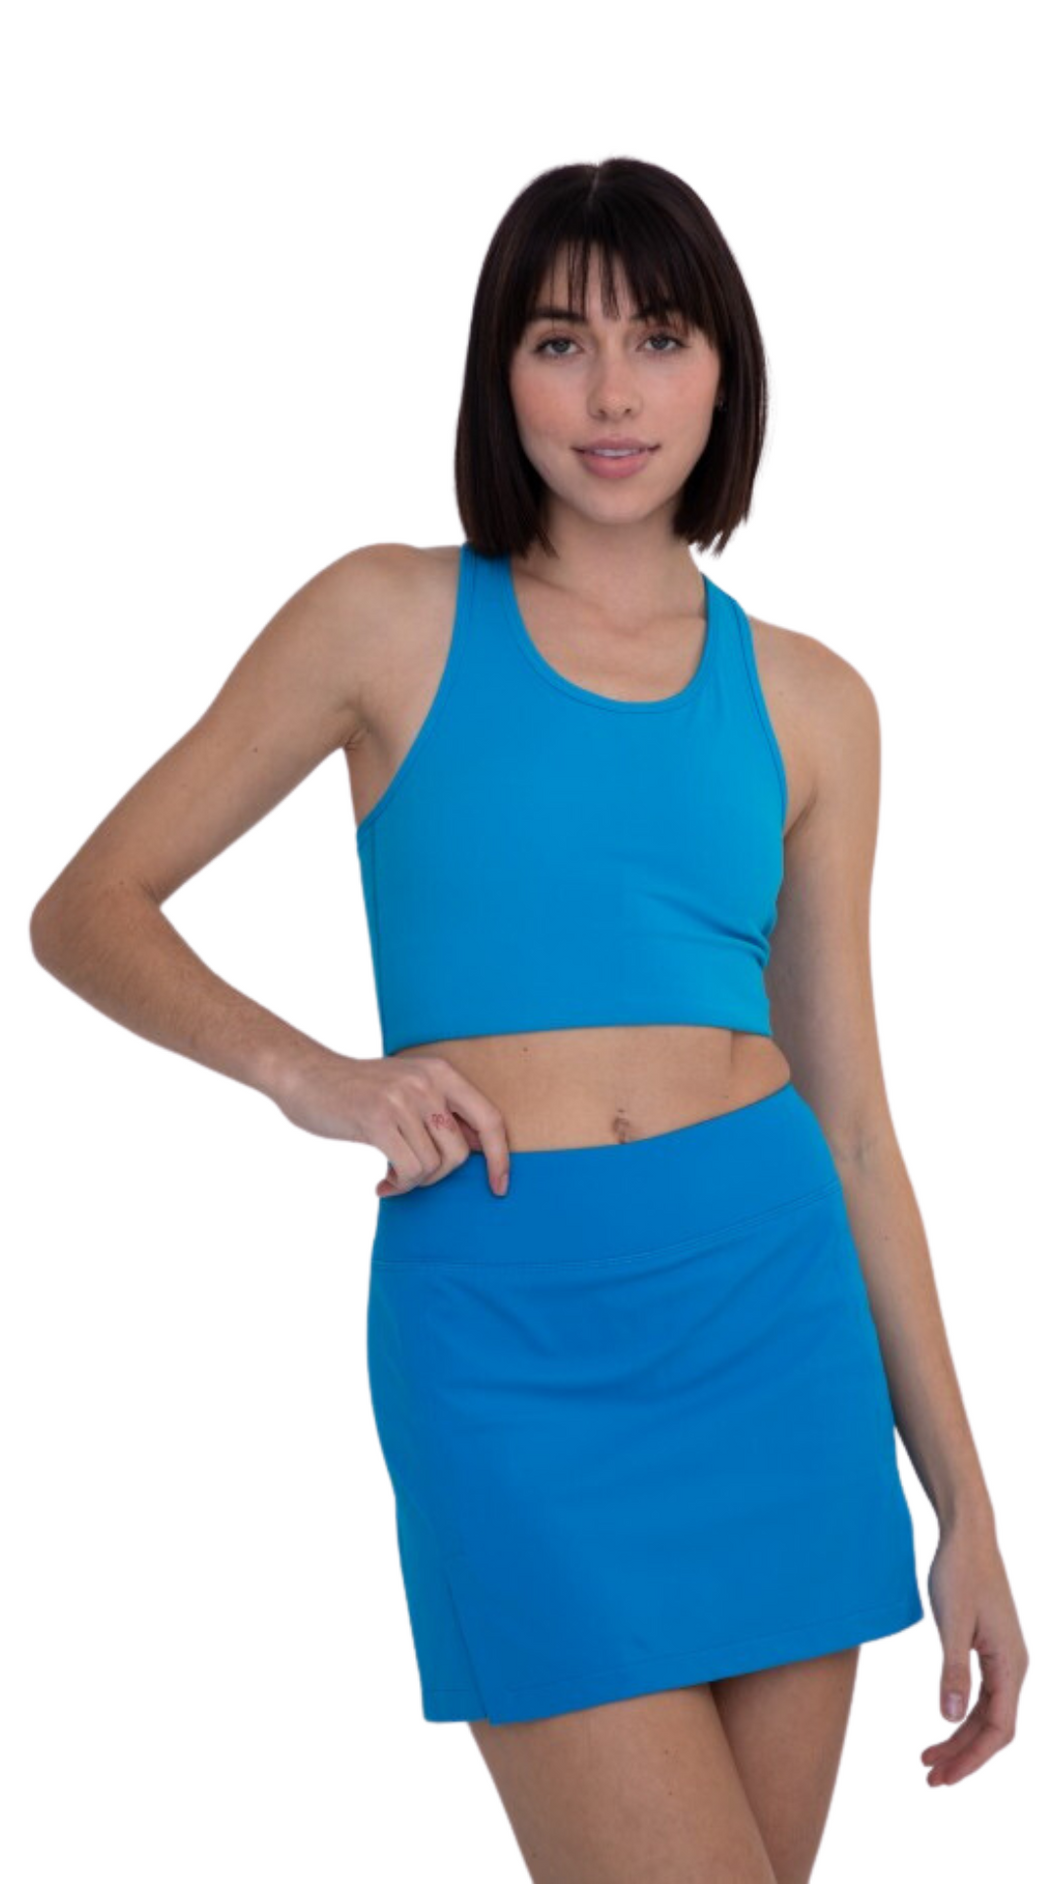 FREE MB EXTREME RACER TOP TURQUOISE